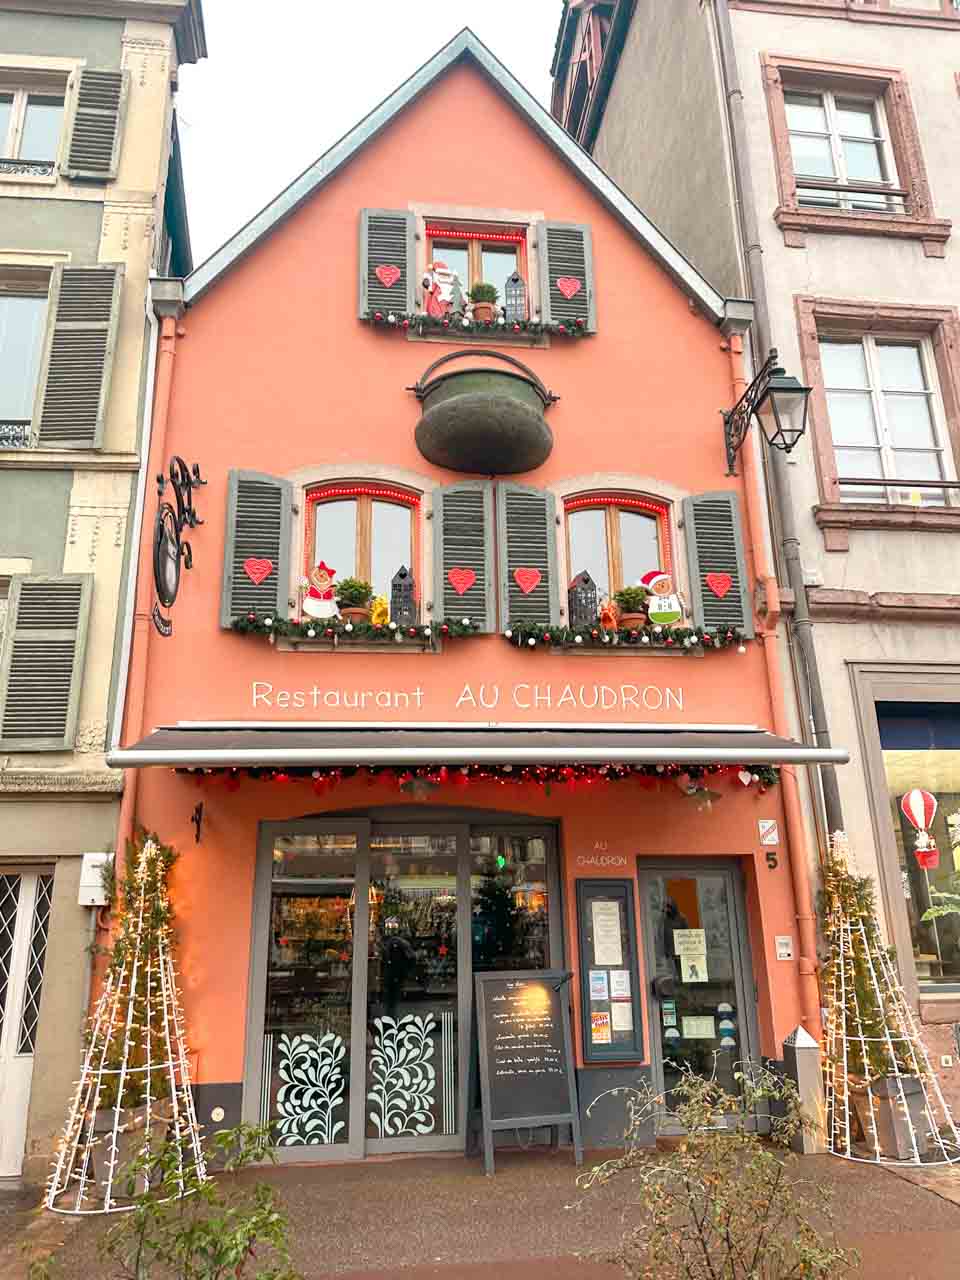 The facade of Restaurant Au Chaudron in Colmar, painted in a vibrant salmon hue with Christmas wreaths and hearts on the shutters, complemented by a minimalist Christmas tree decoration